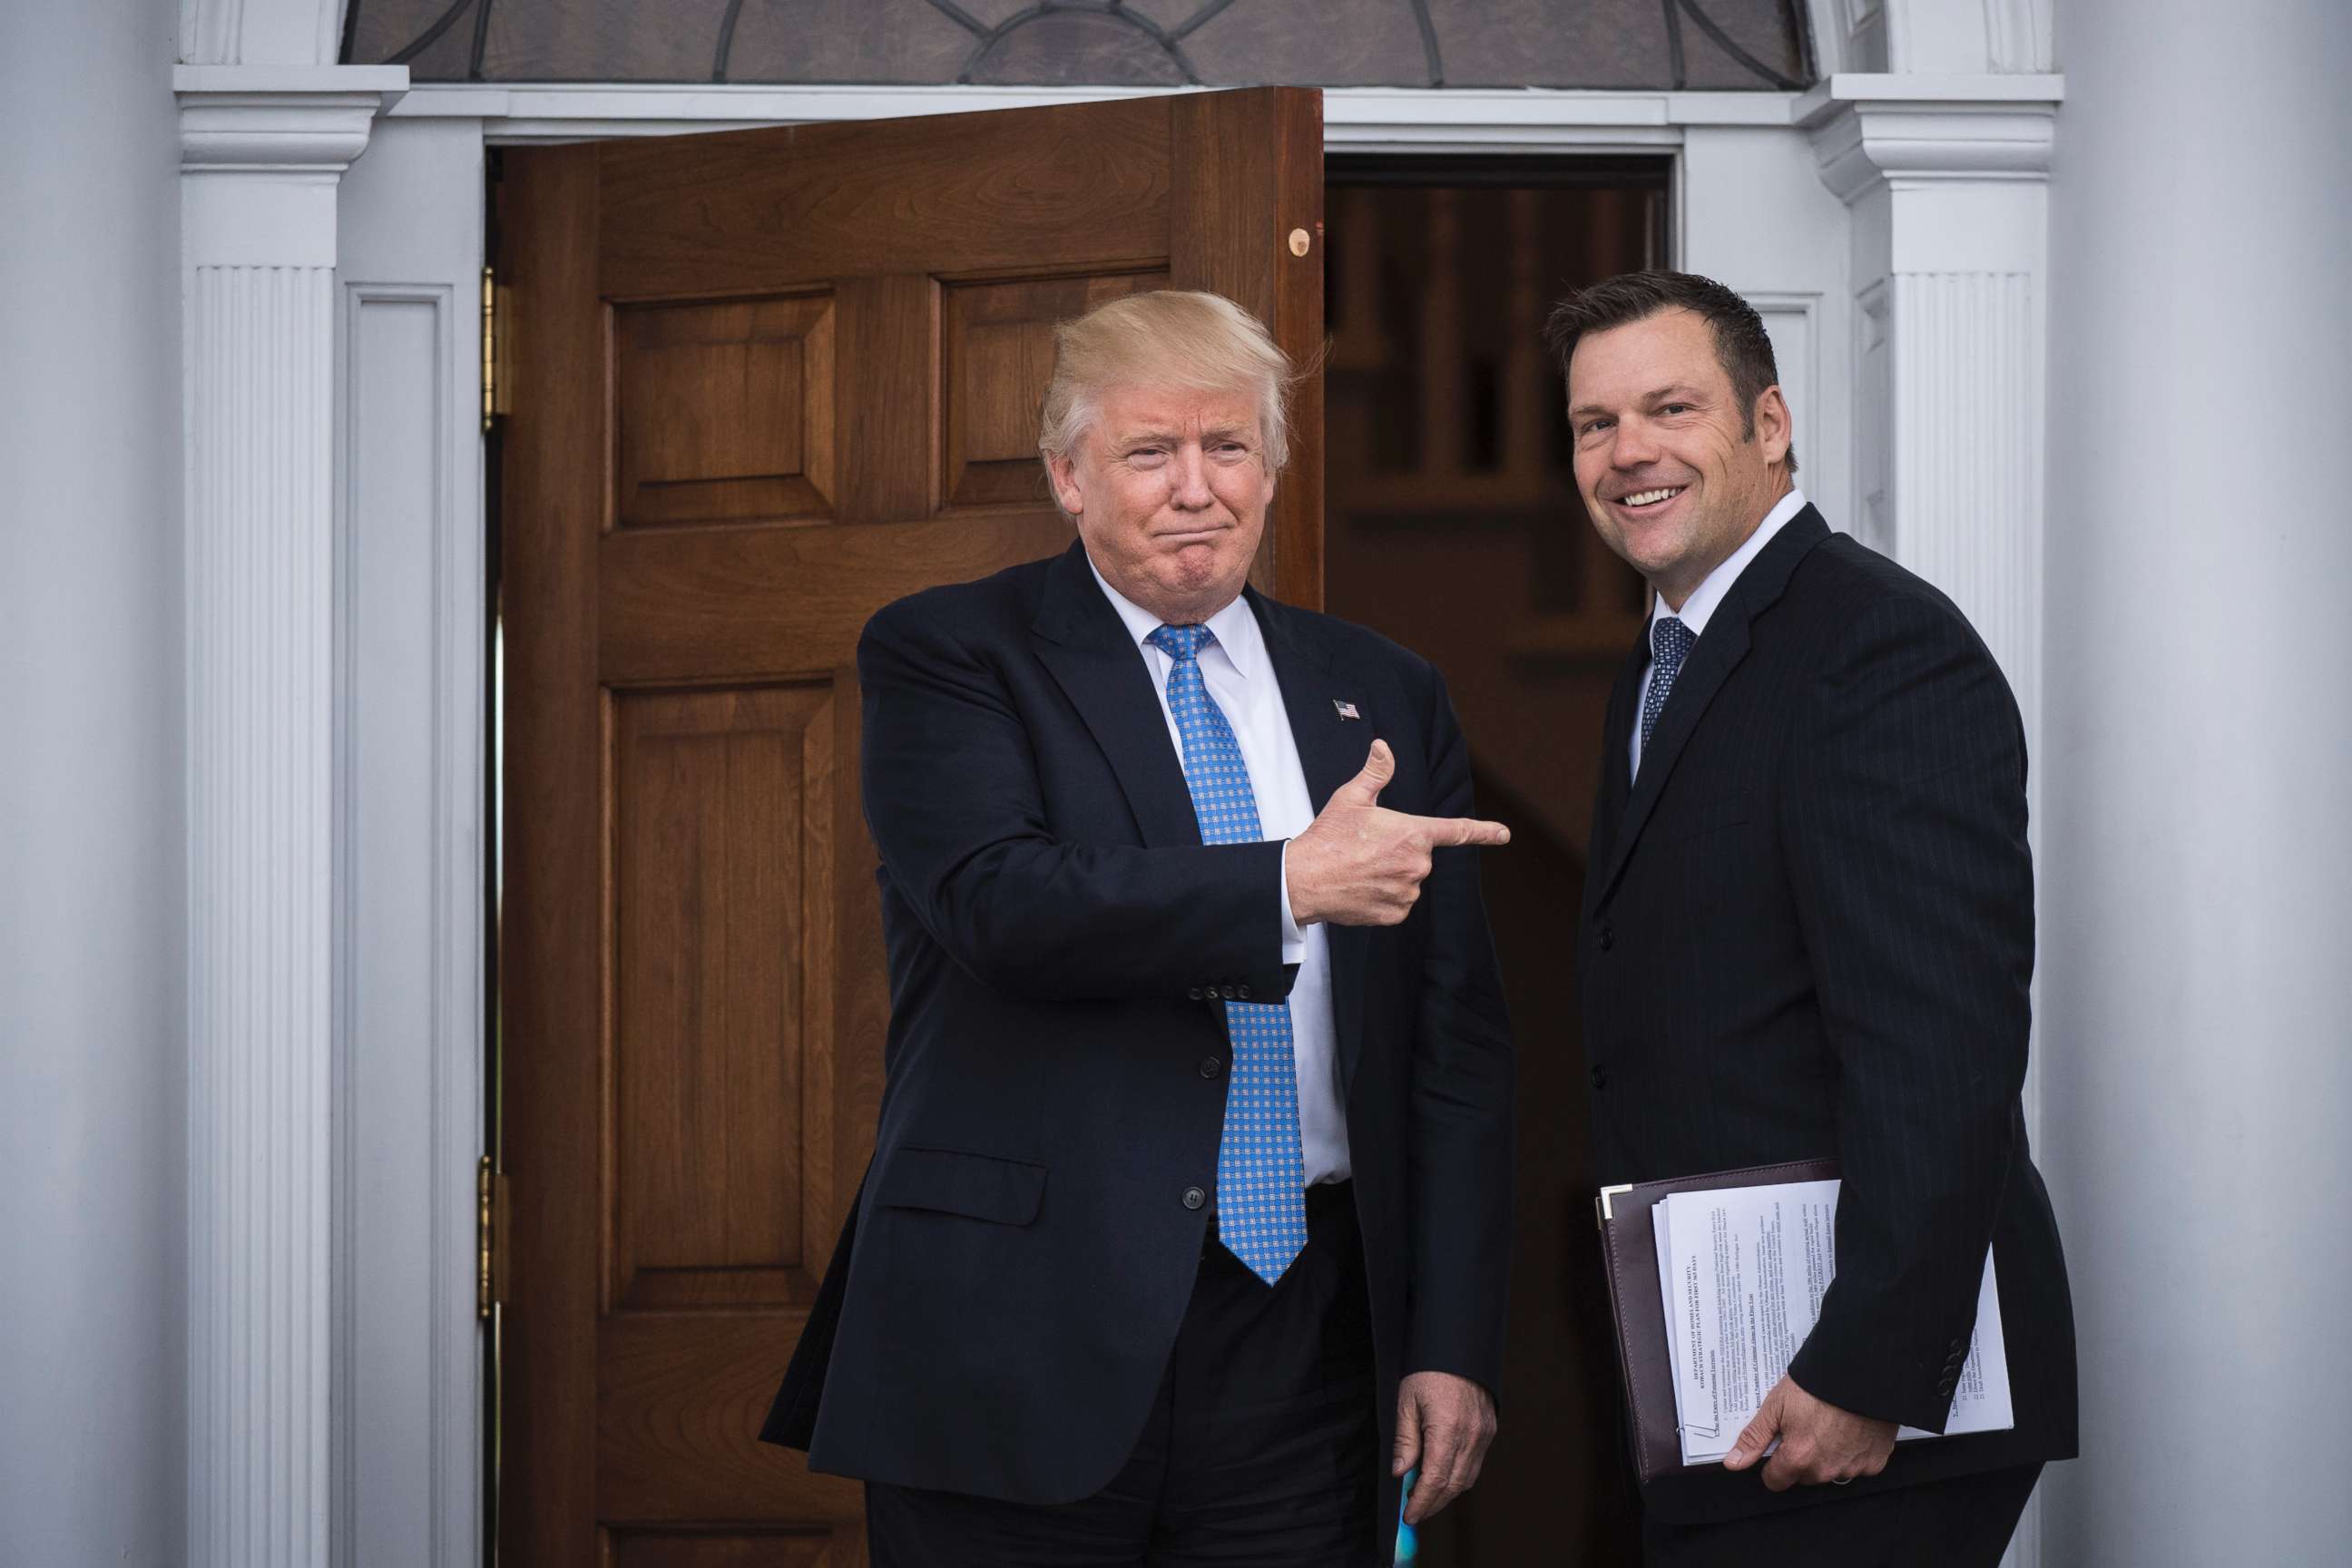 PHOTO: President-elect Donald Trump greets Kansas Secretary of State, Kris Kobach, at the clubhouse at Trump National Golf Club Bedminster in Bedminster Township, N.J., Nov. 20, 2016.